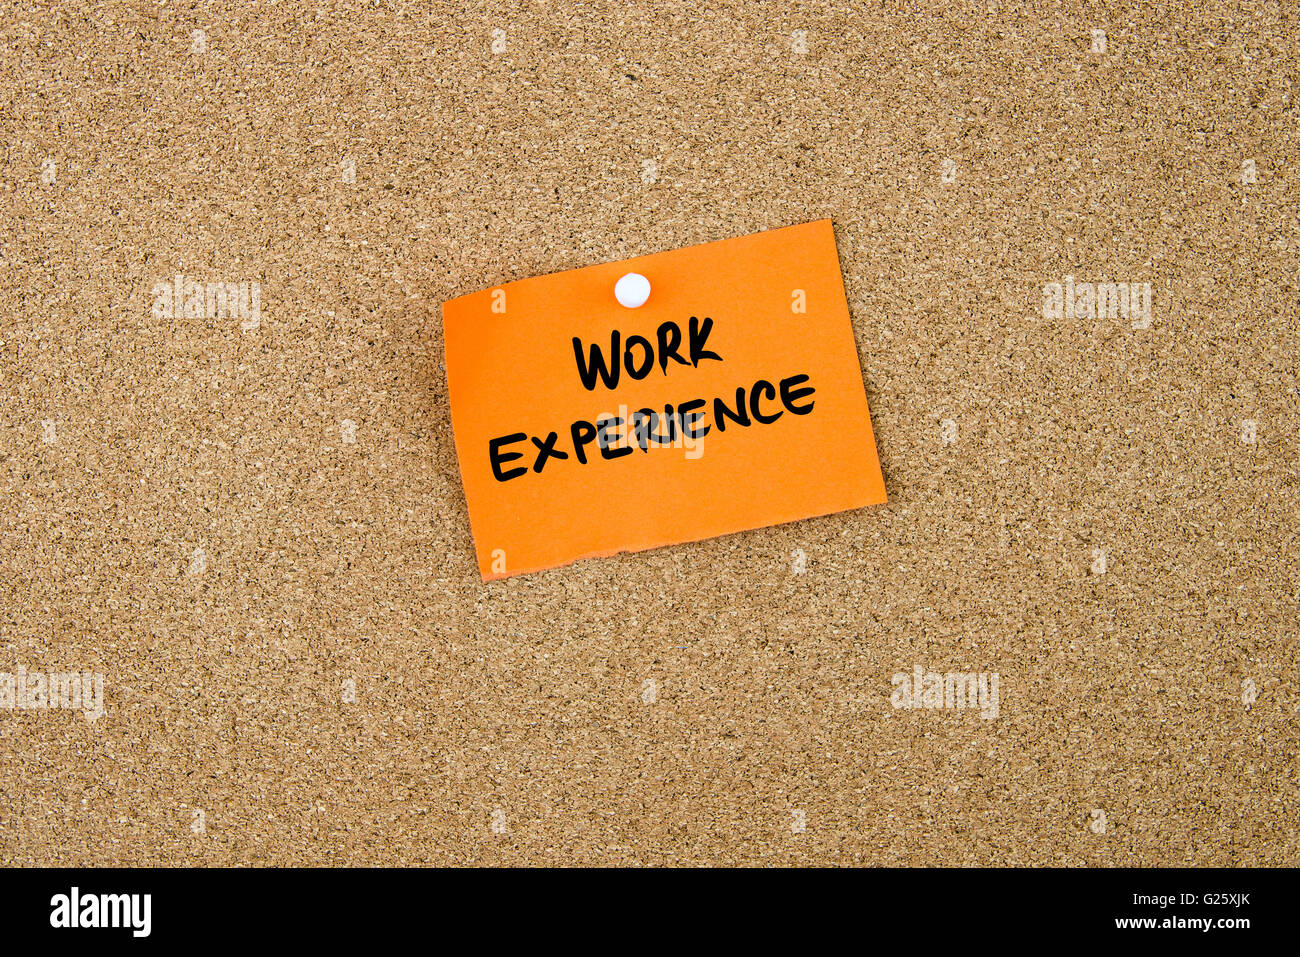 WORK EXPERIENCE written on orange paper note pinned on cork board with white thumbtacks, copy space available Stock Photo